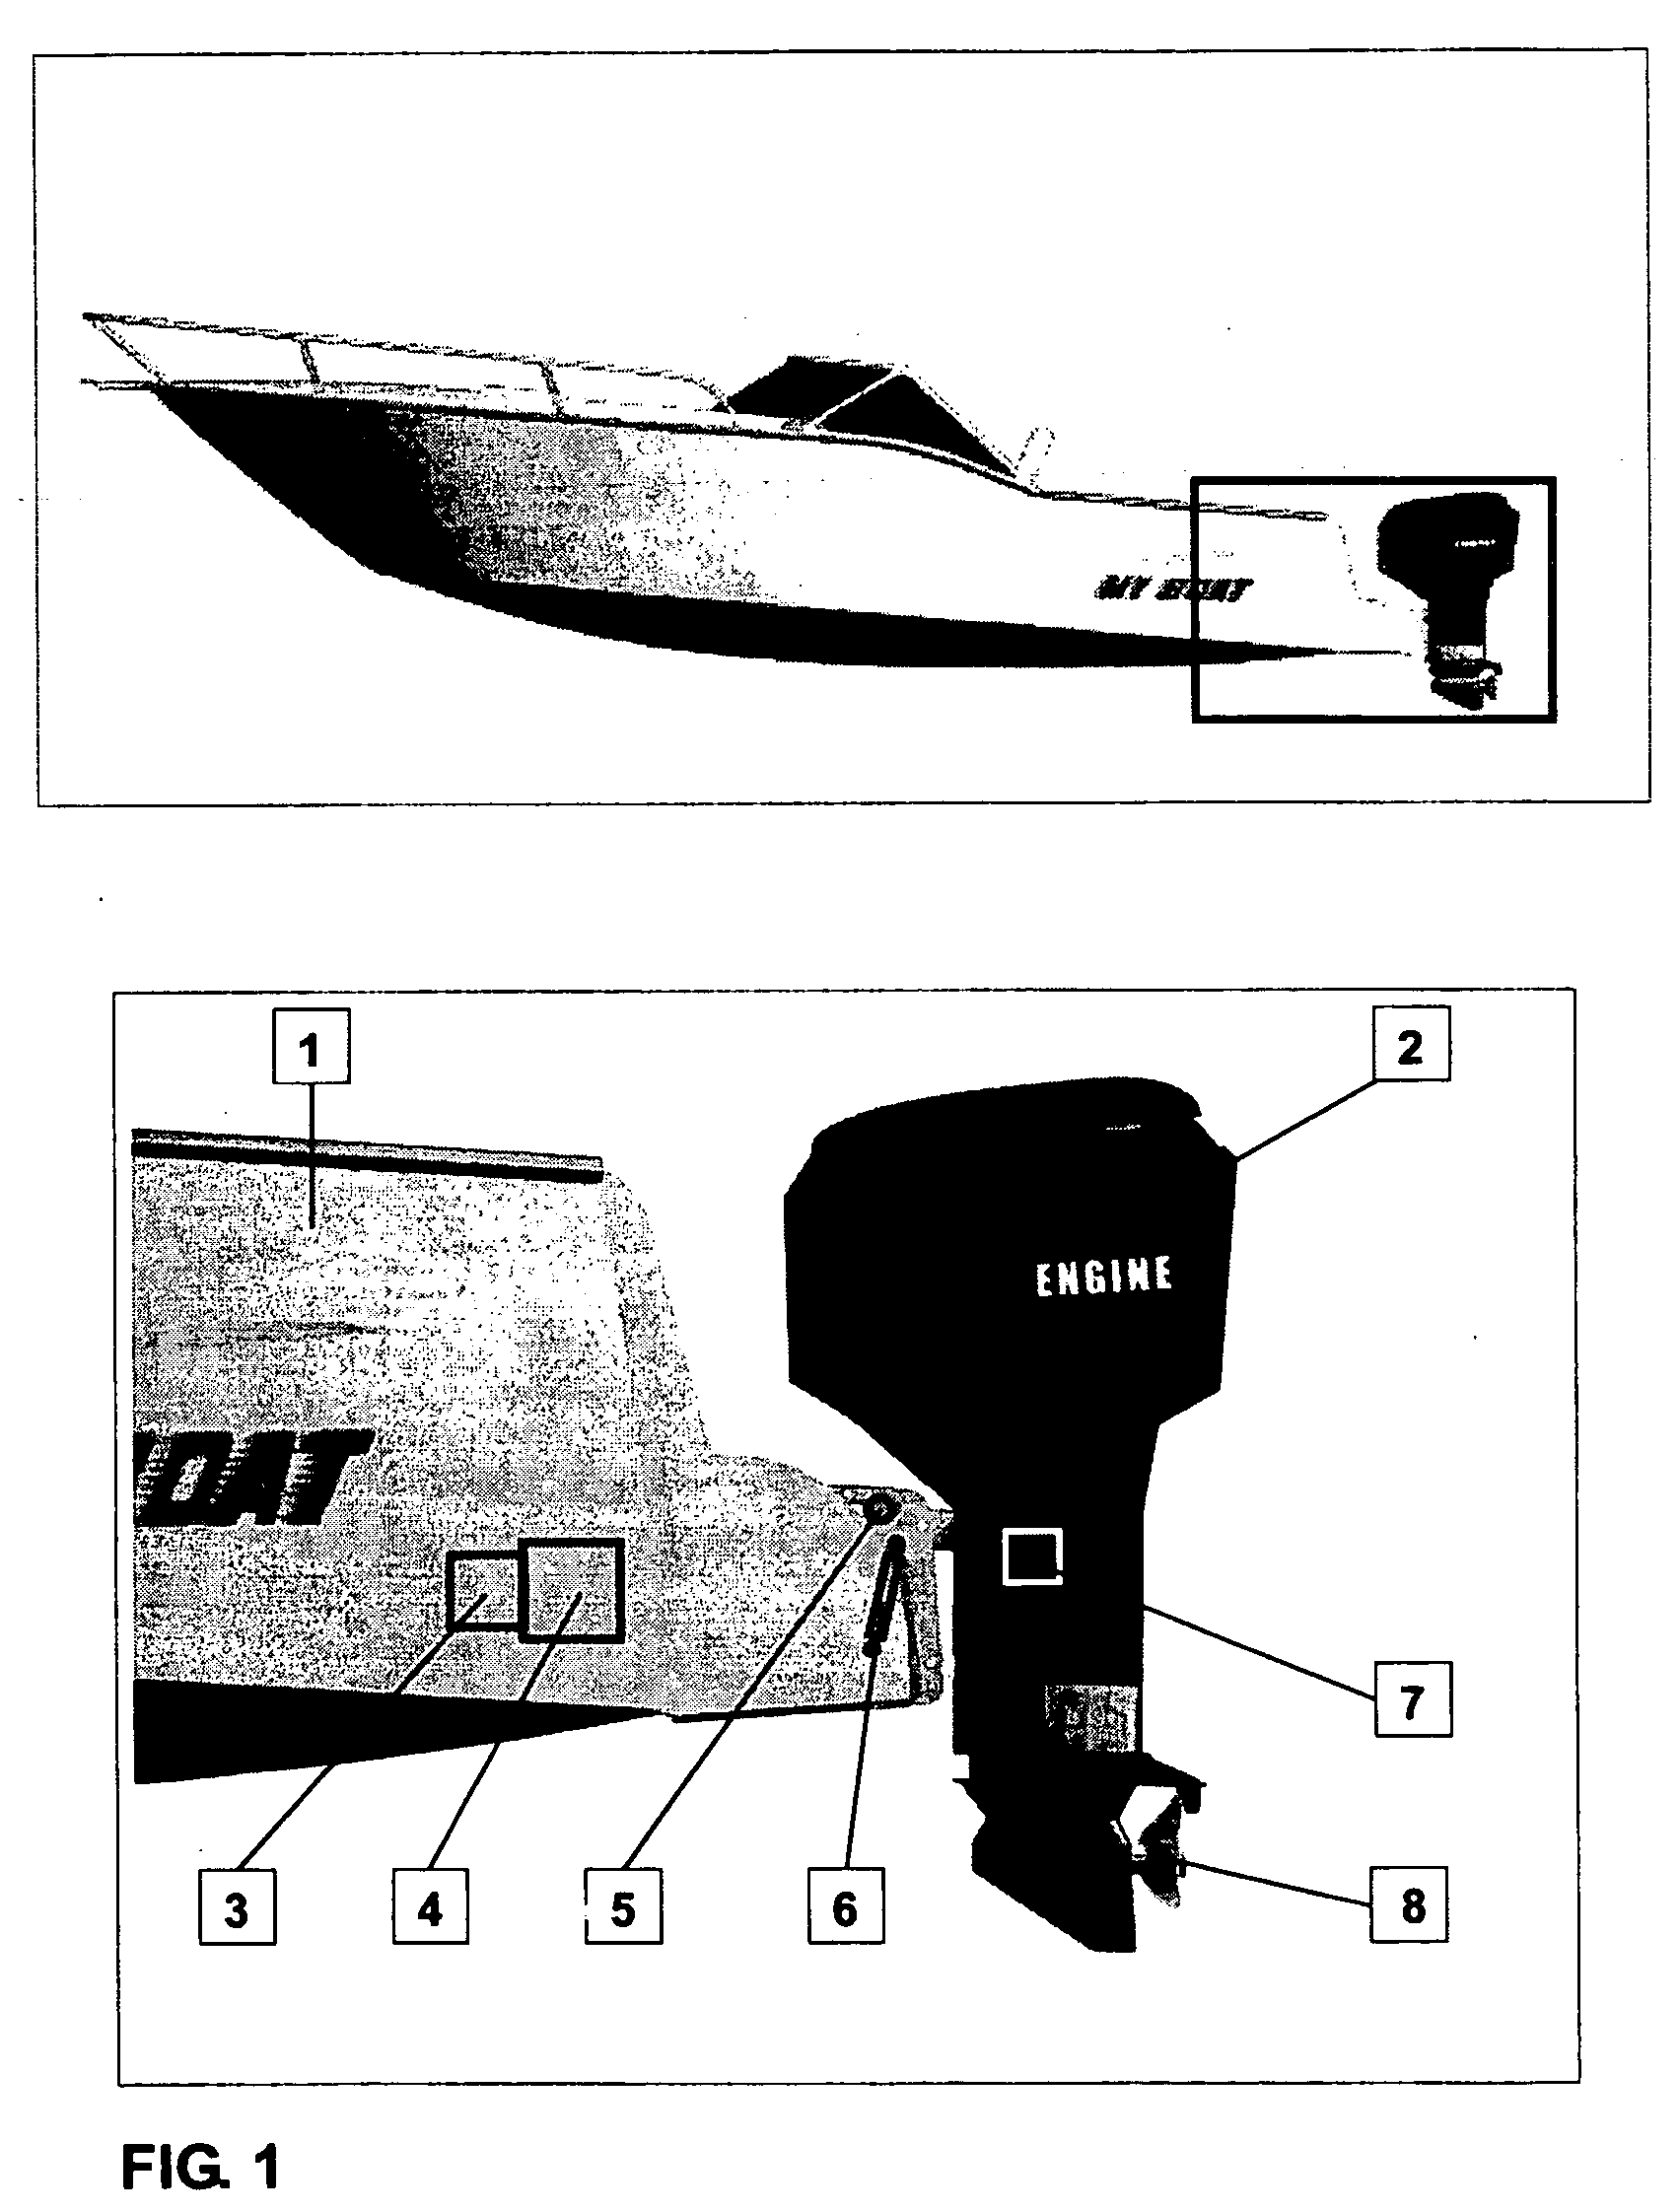 Automatic system for adjusting the trim of a motor boat